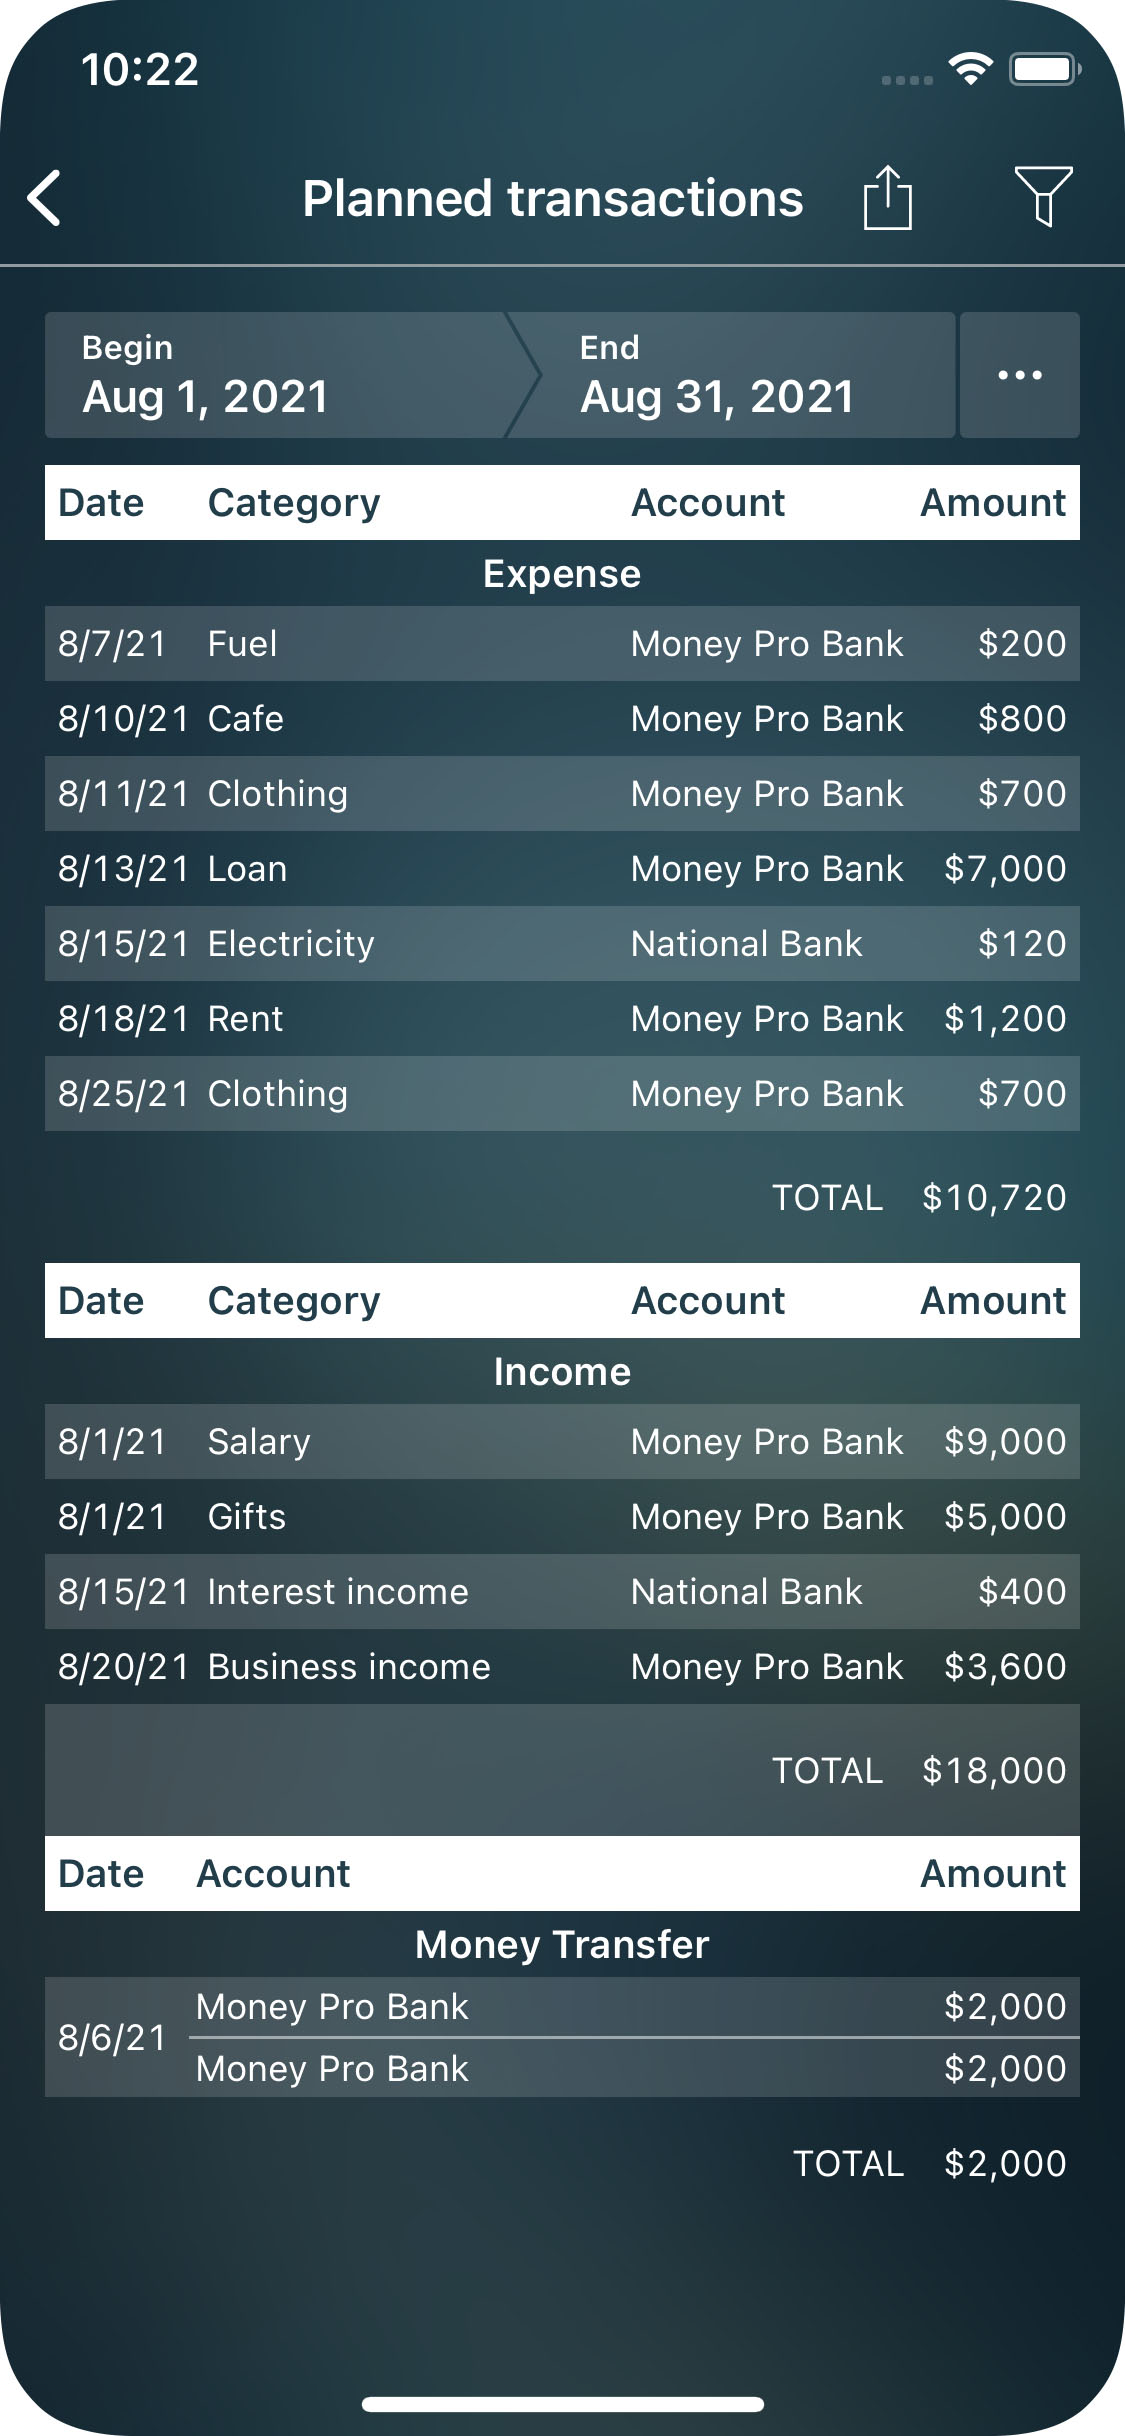 Money Pro - Planned transactions report - iPhone